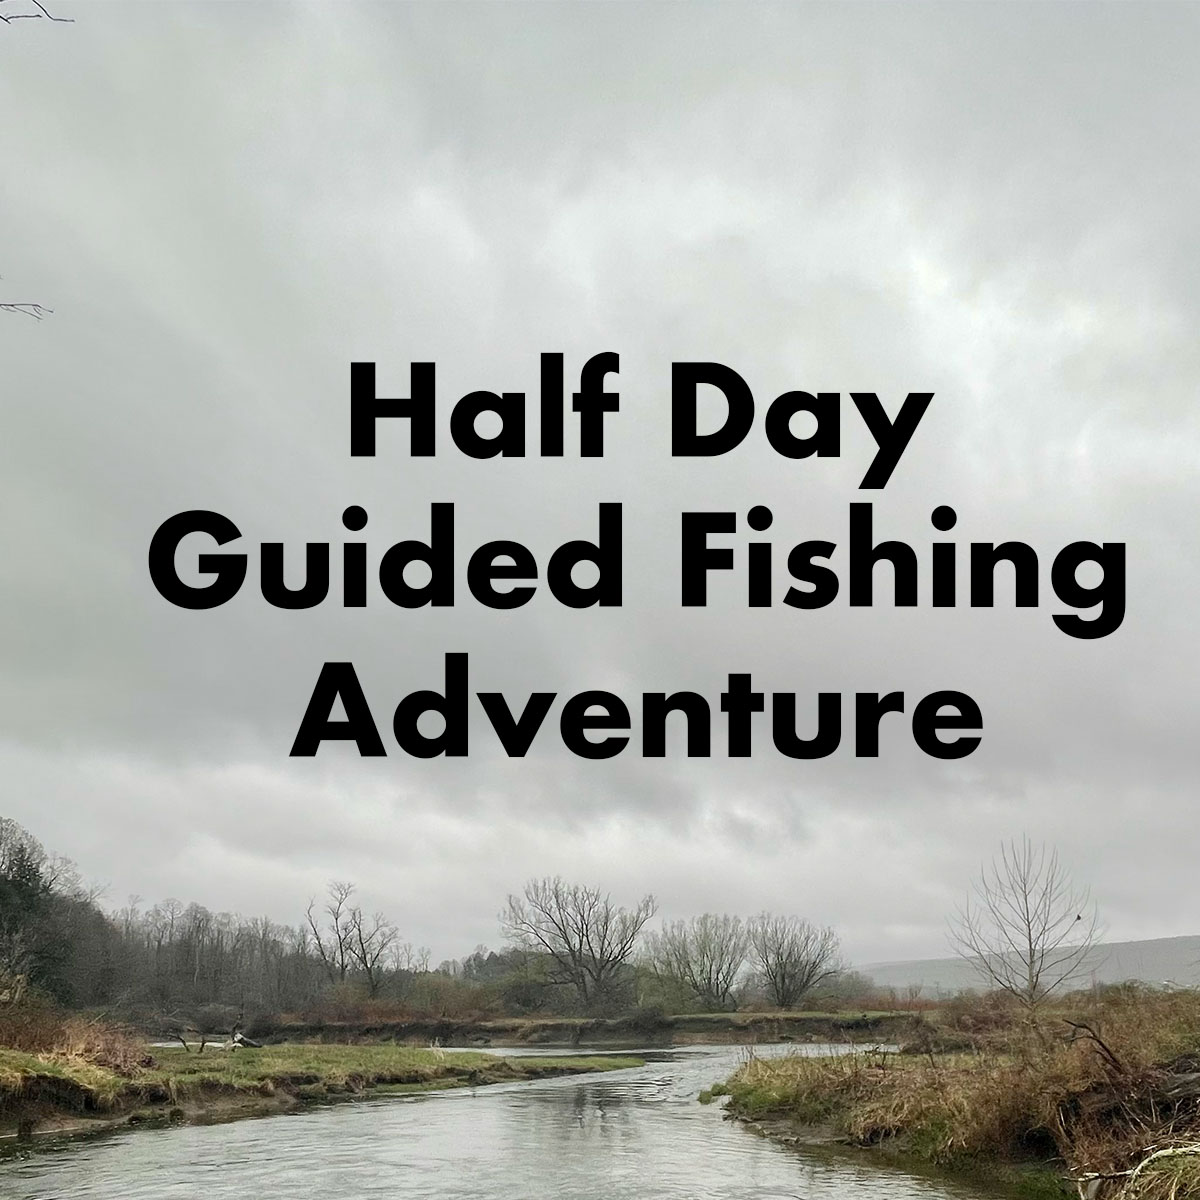 Half day guided fishing trip